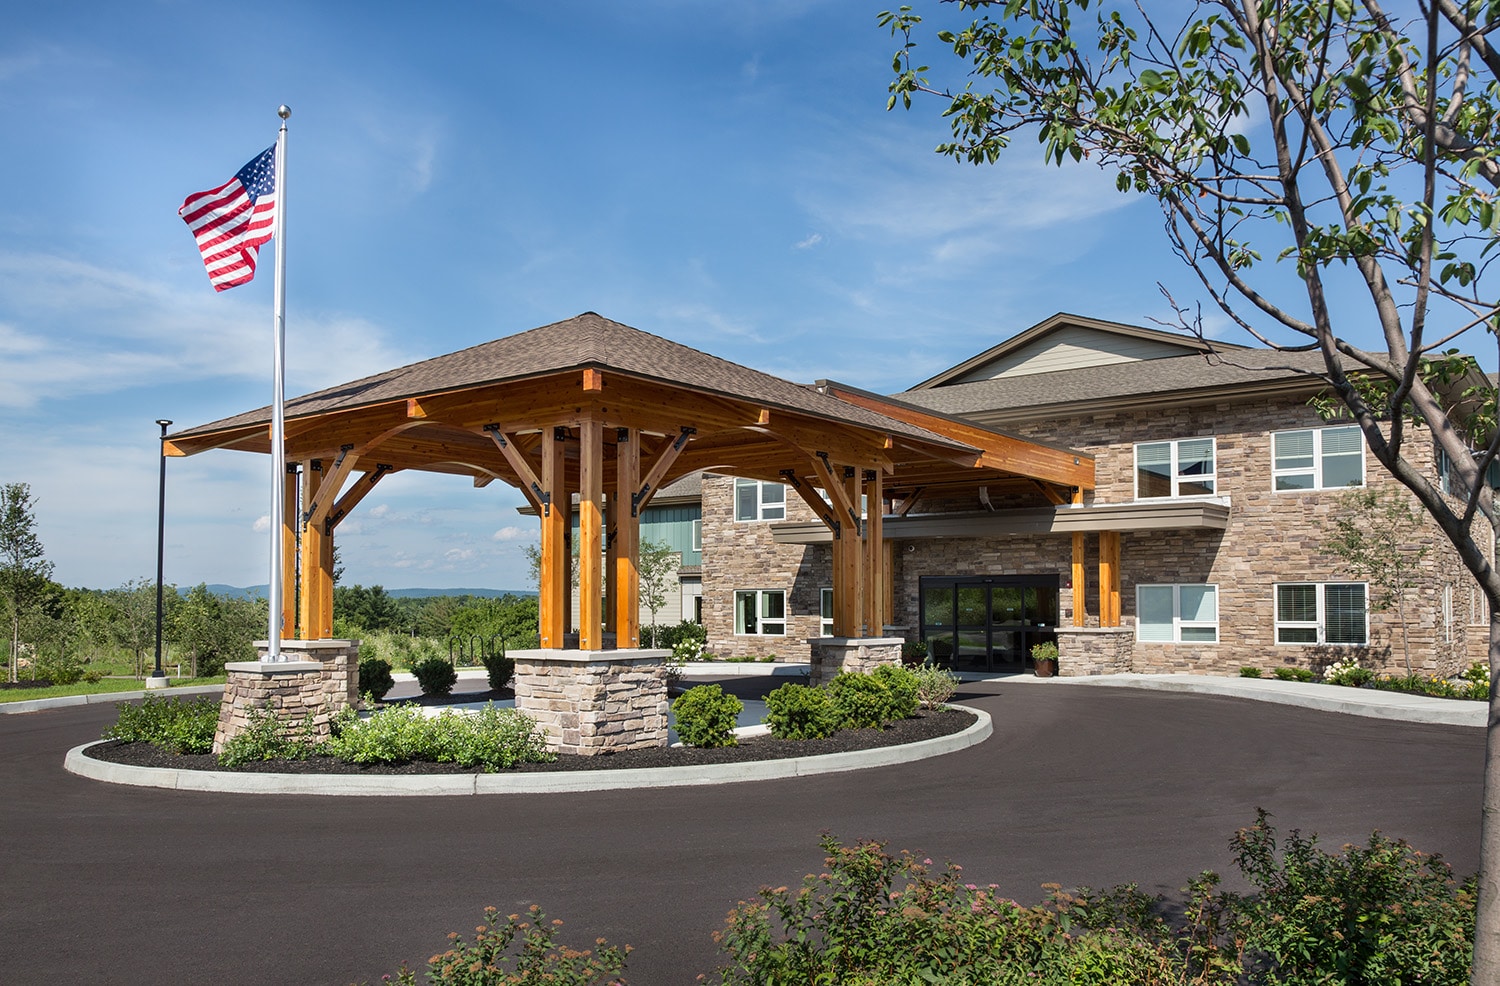 The Residence at Quarry Hill | Modern Senior Living Comforts, Safety